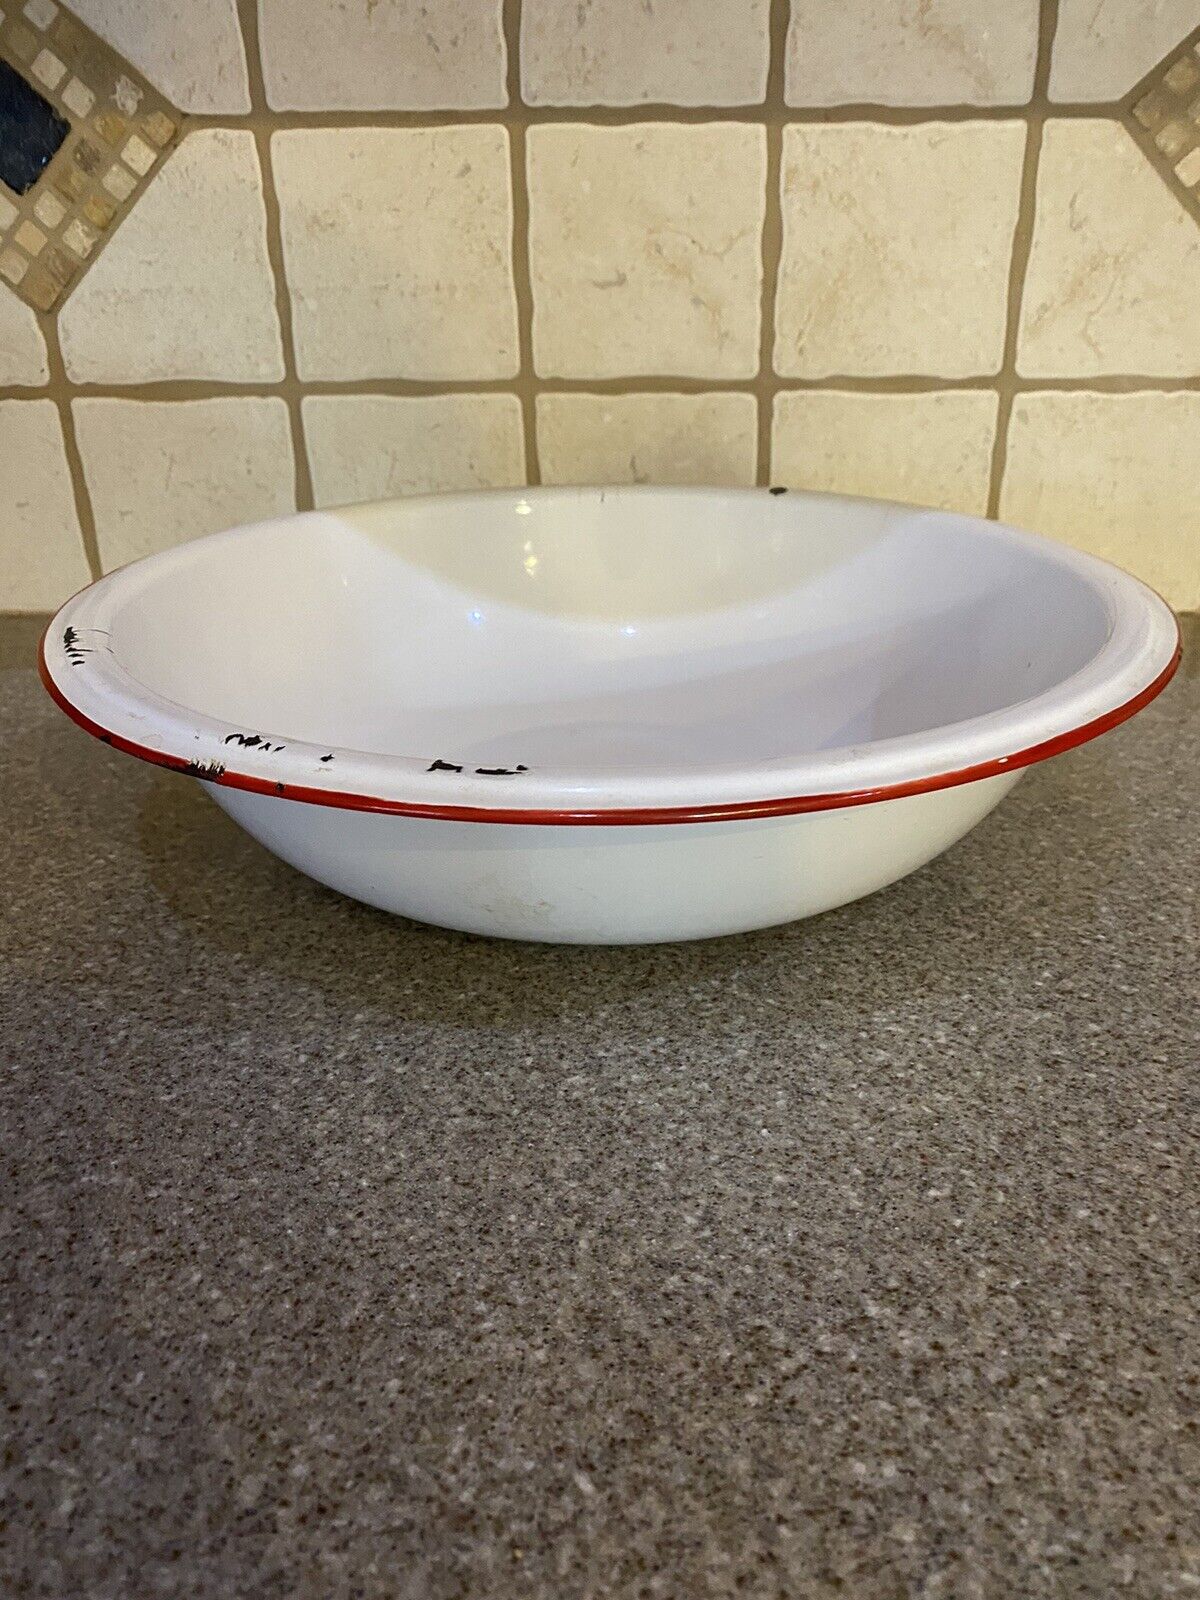 Vintage Enamelware With Red Trim Basin Farm House Round Wash Bowl 13.5”